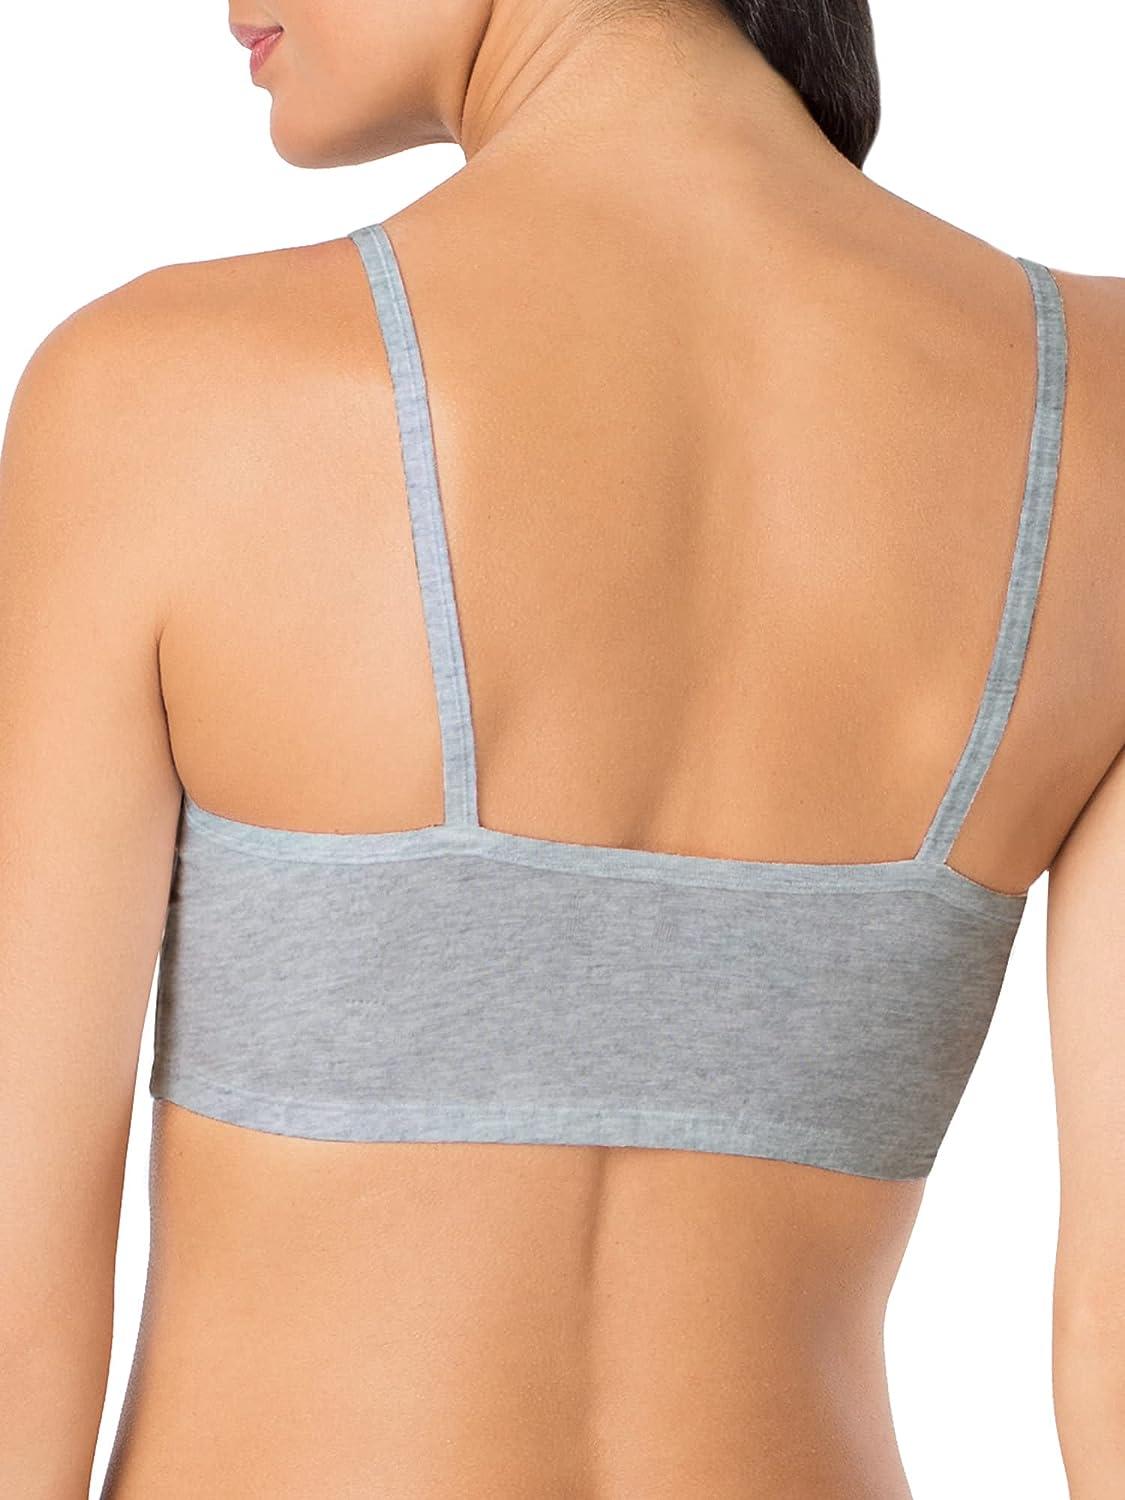  Calvin Klein Girls Seamless Bralette 3 Pack, Heather  Grey/Black/White, S: Clothing, Shoes & Jewelry